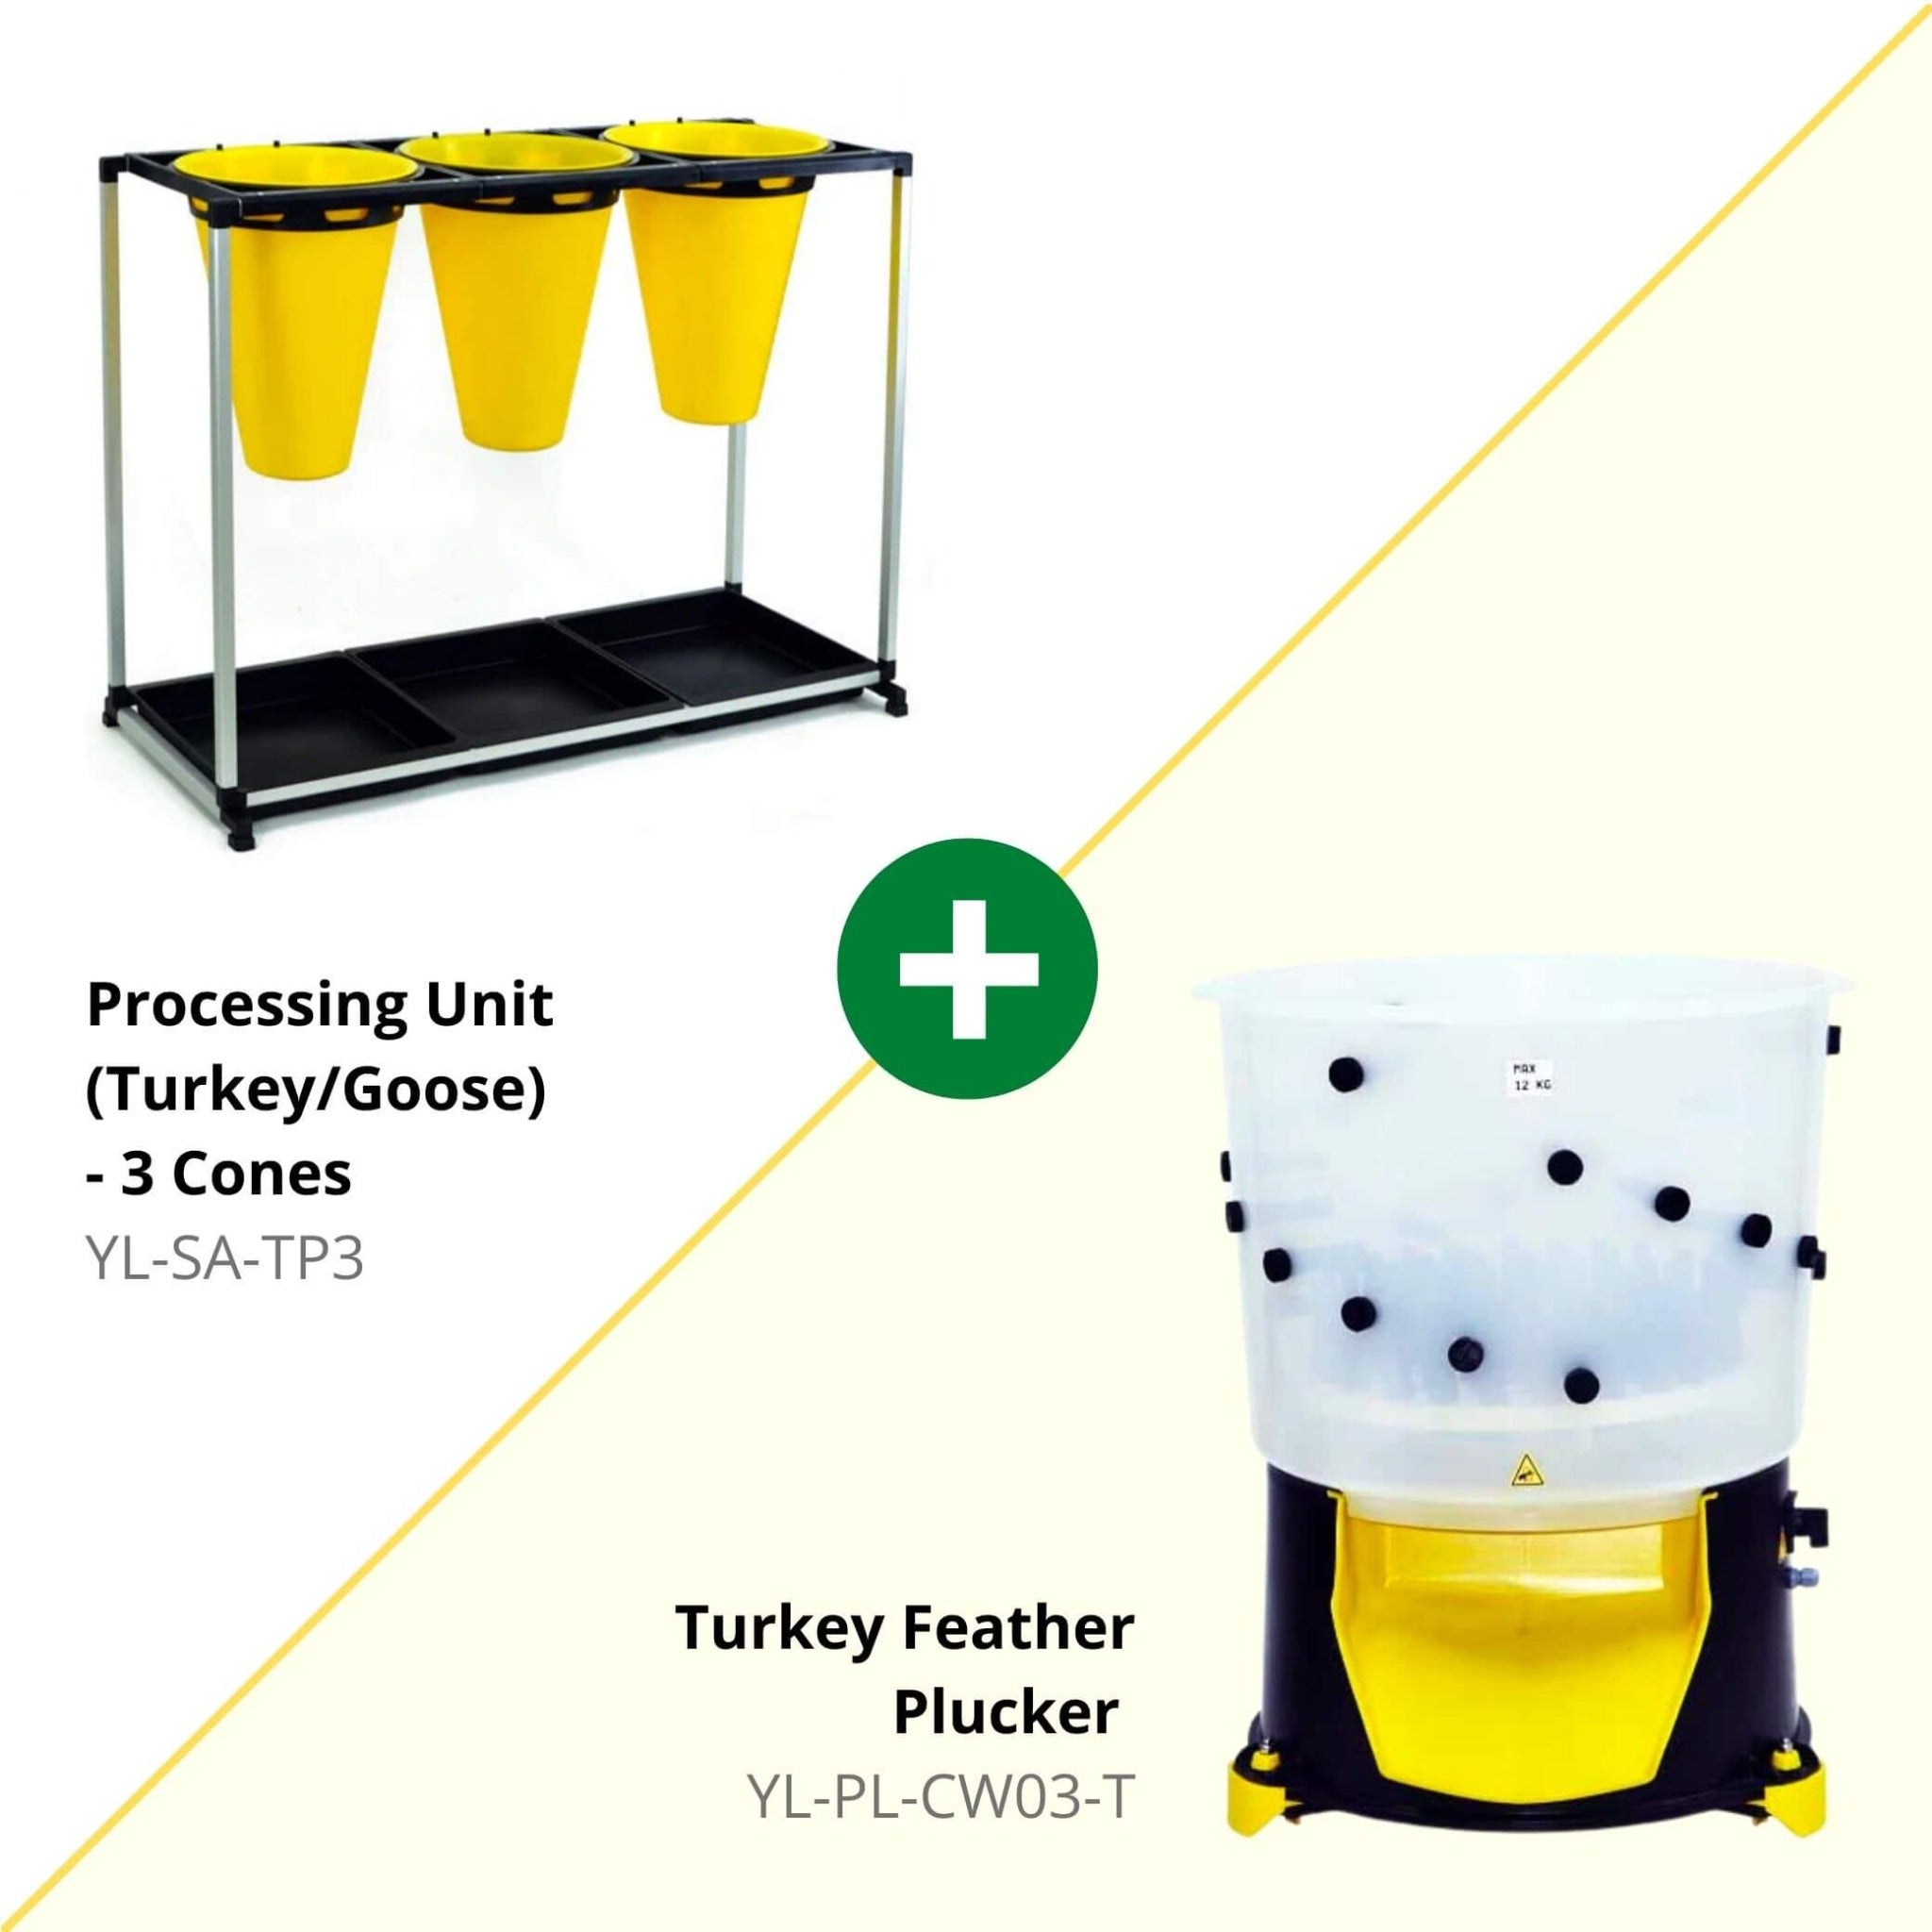 Hatching Time Cimuka. Image shows that kit comes with Processing cones and Feather plucker for Turkey.